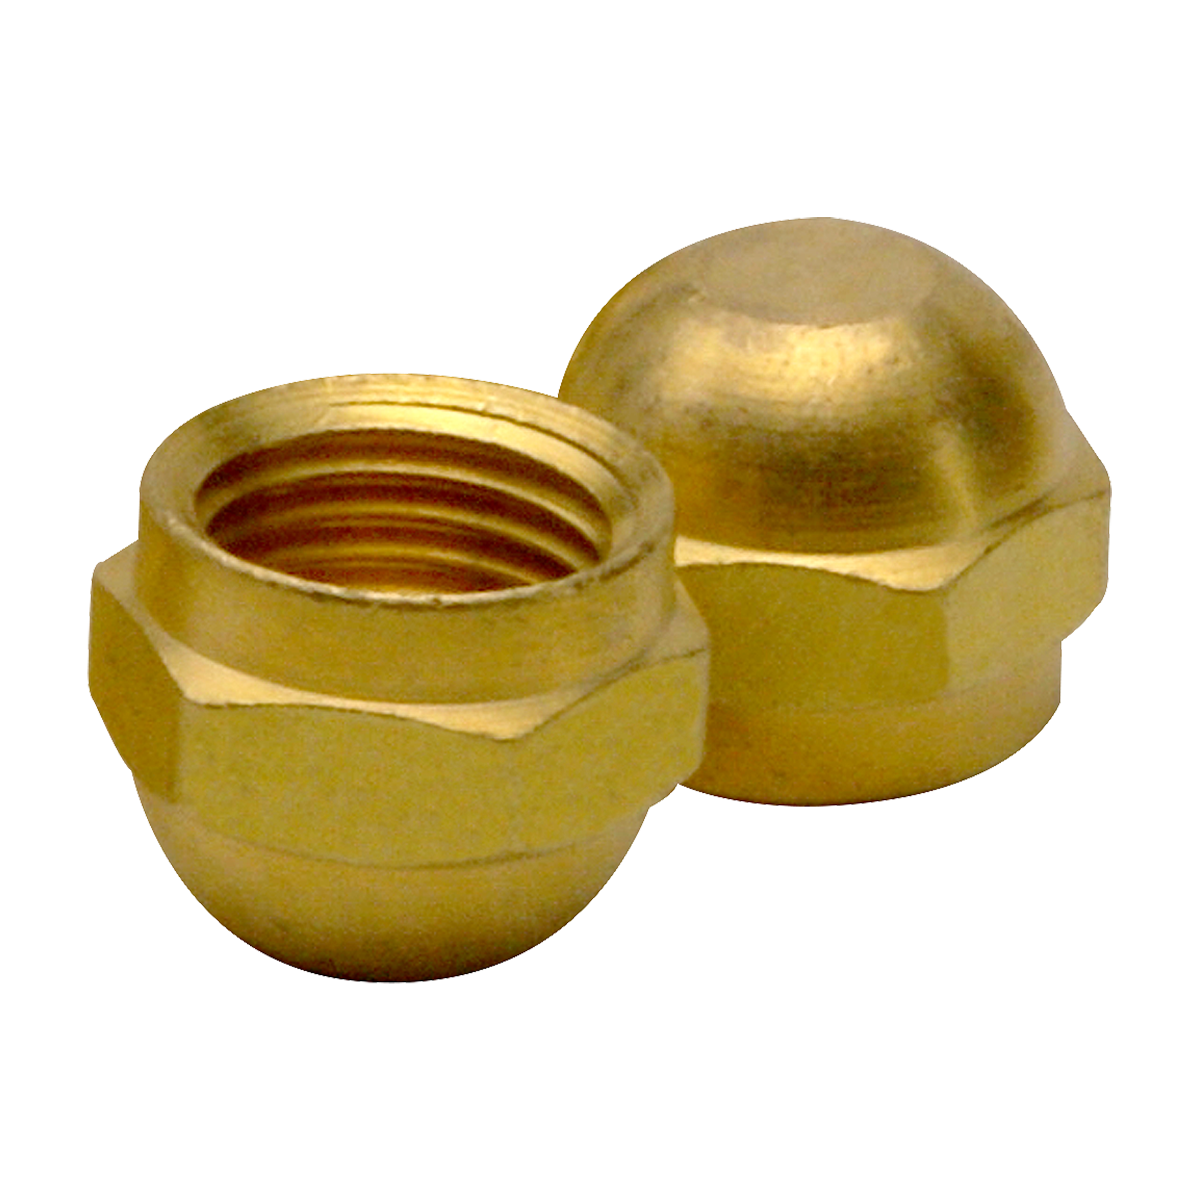 https://www.jbind.com/wp-content/uploads/2021/07/N5-3-TO-N5-12-JB-Flare-Cap-Brass-Fittings.png